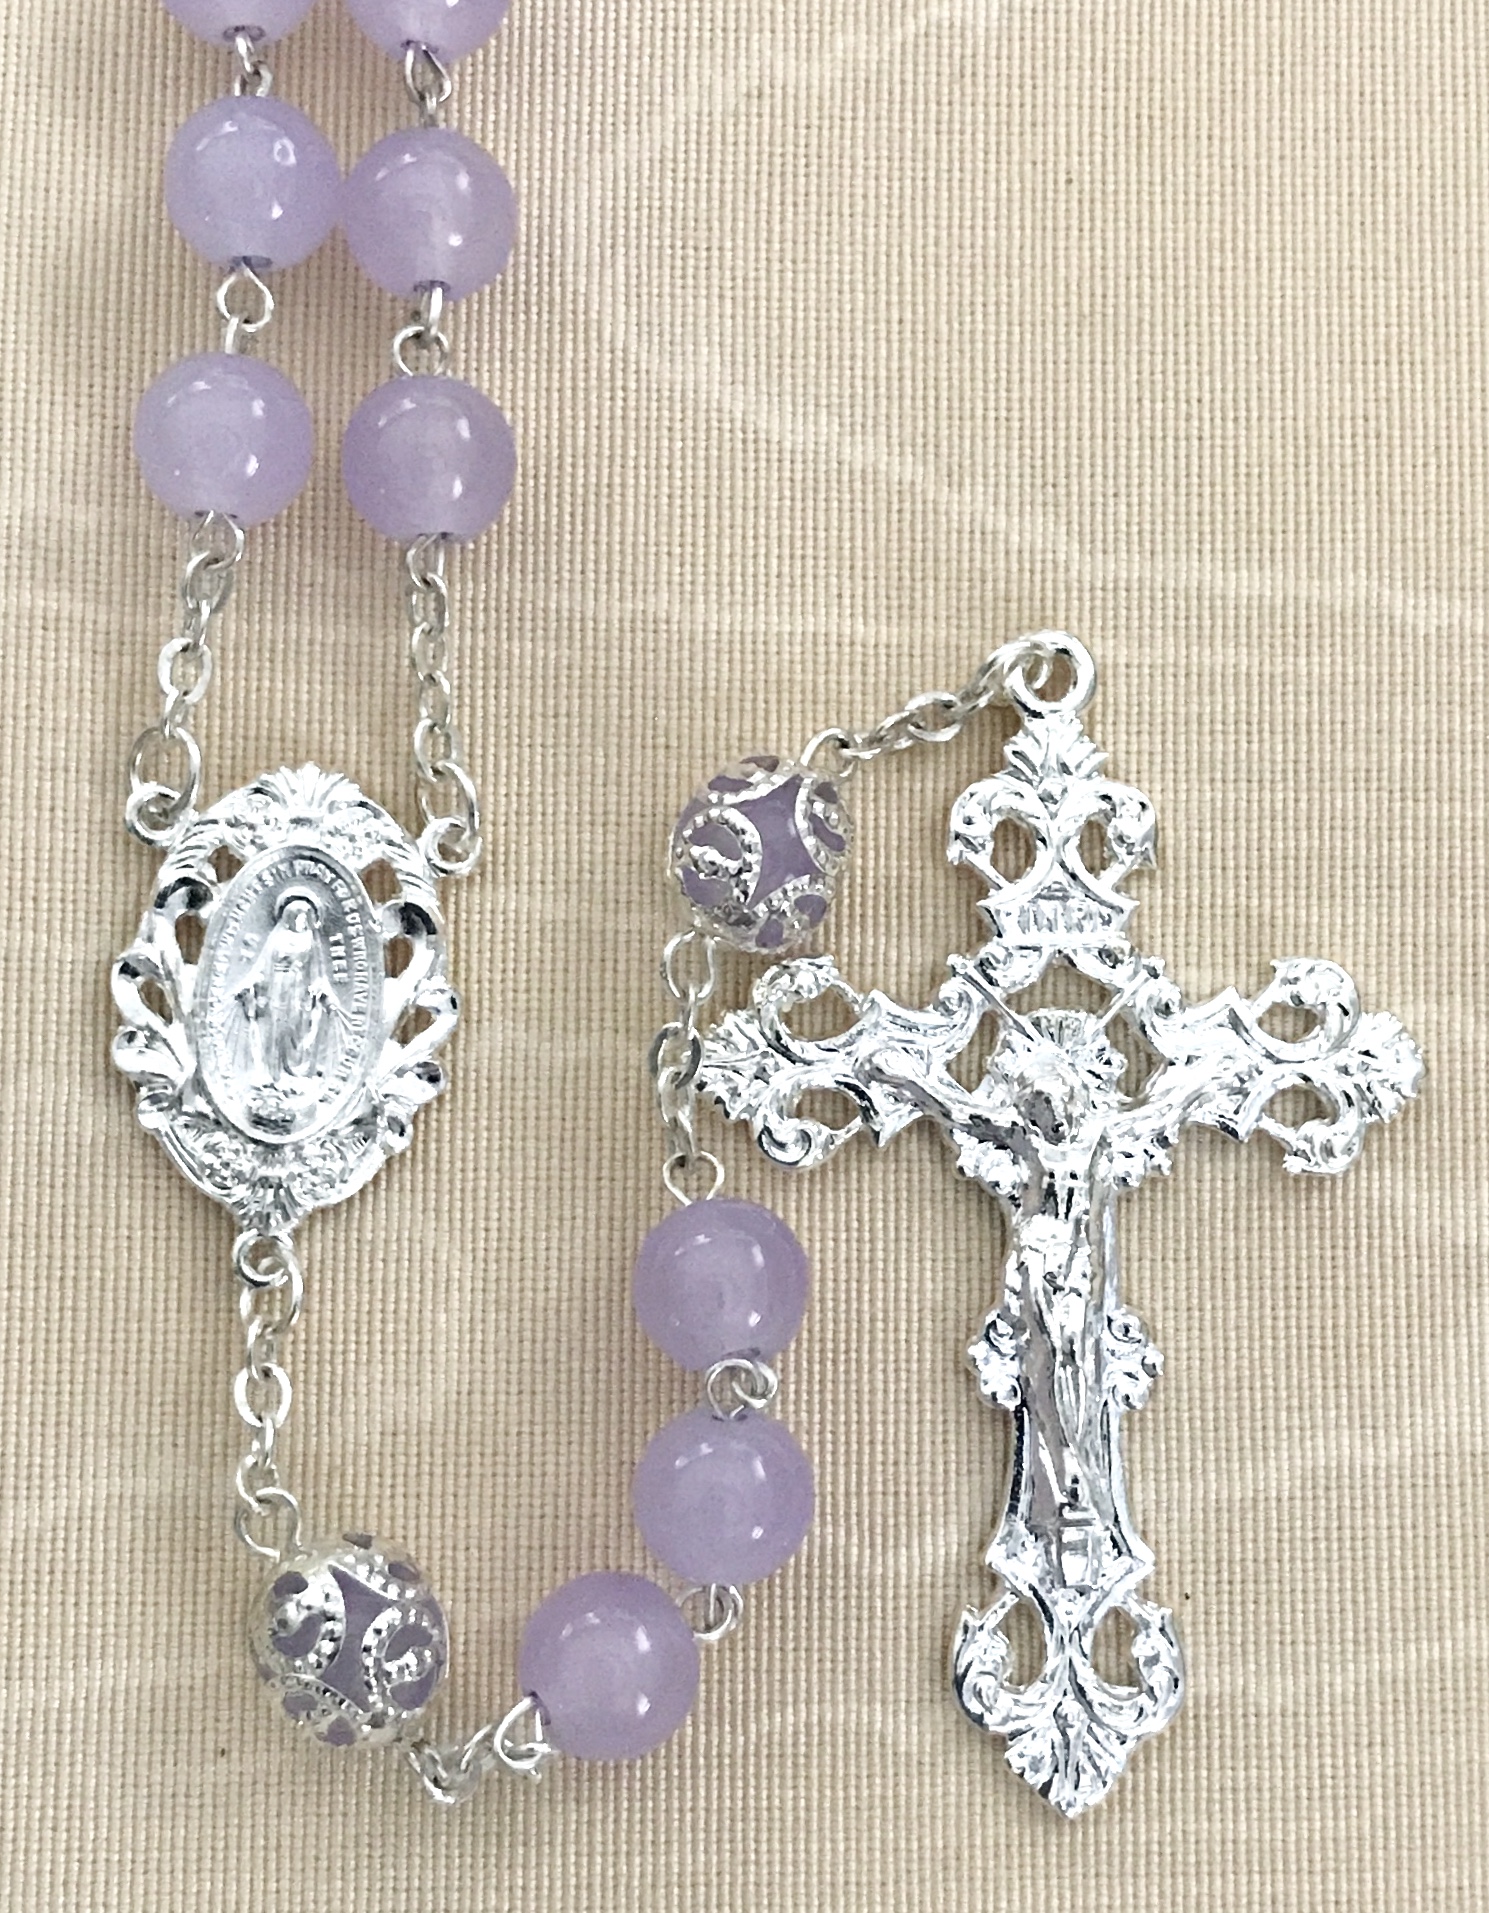 8mm AMETHYST ROMAGNA ROSARY WITH CAPPED OUR FATHER BEADS AND STERLING SILVER PLATED CRUCIFIX AND CENTER GIFT BOXED